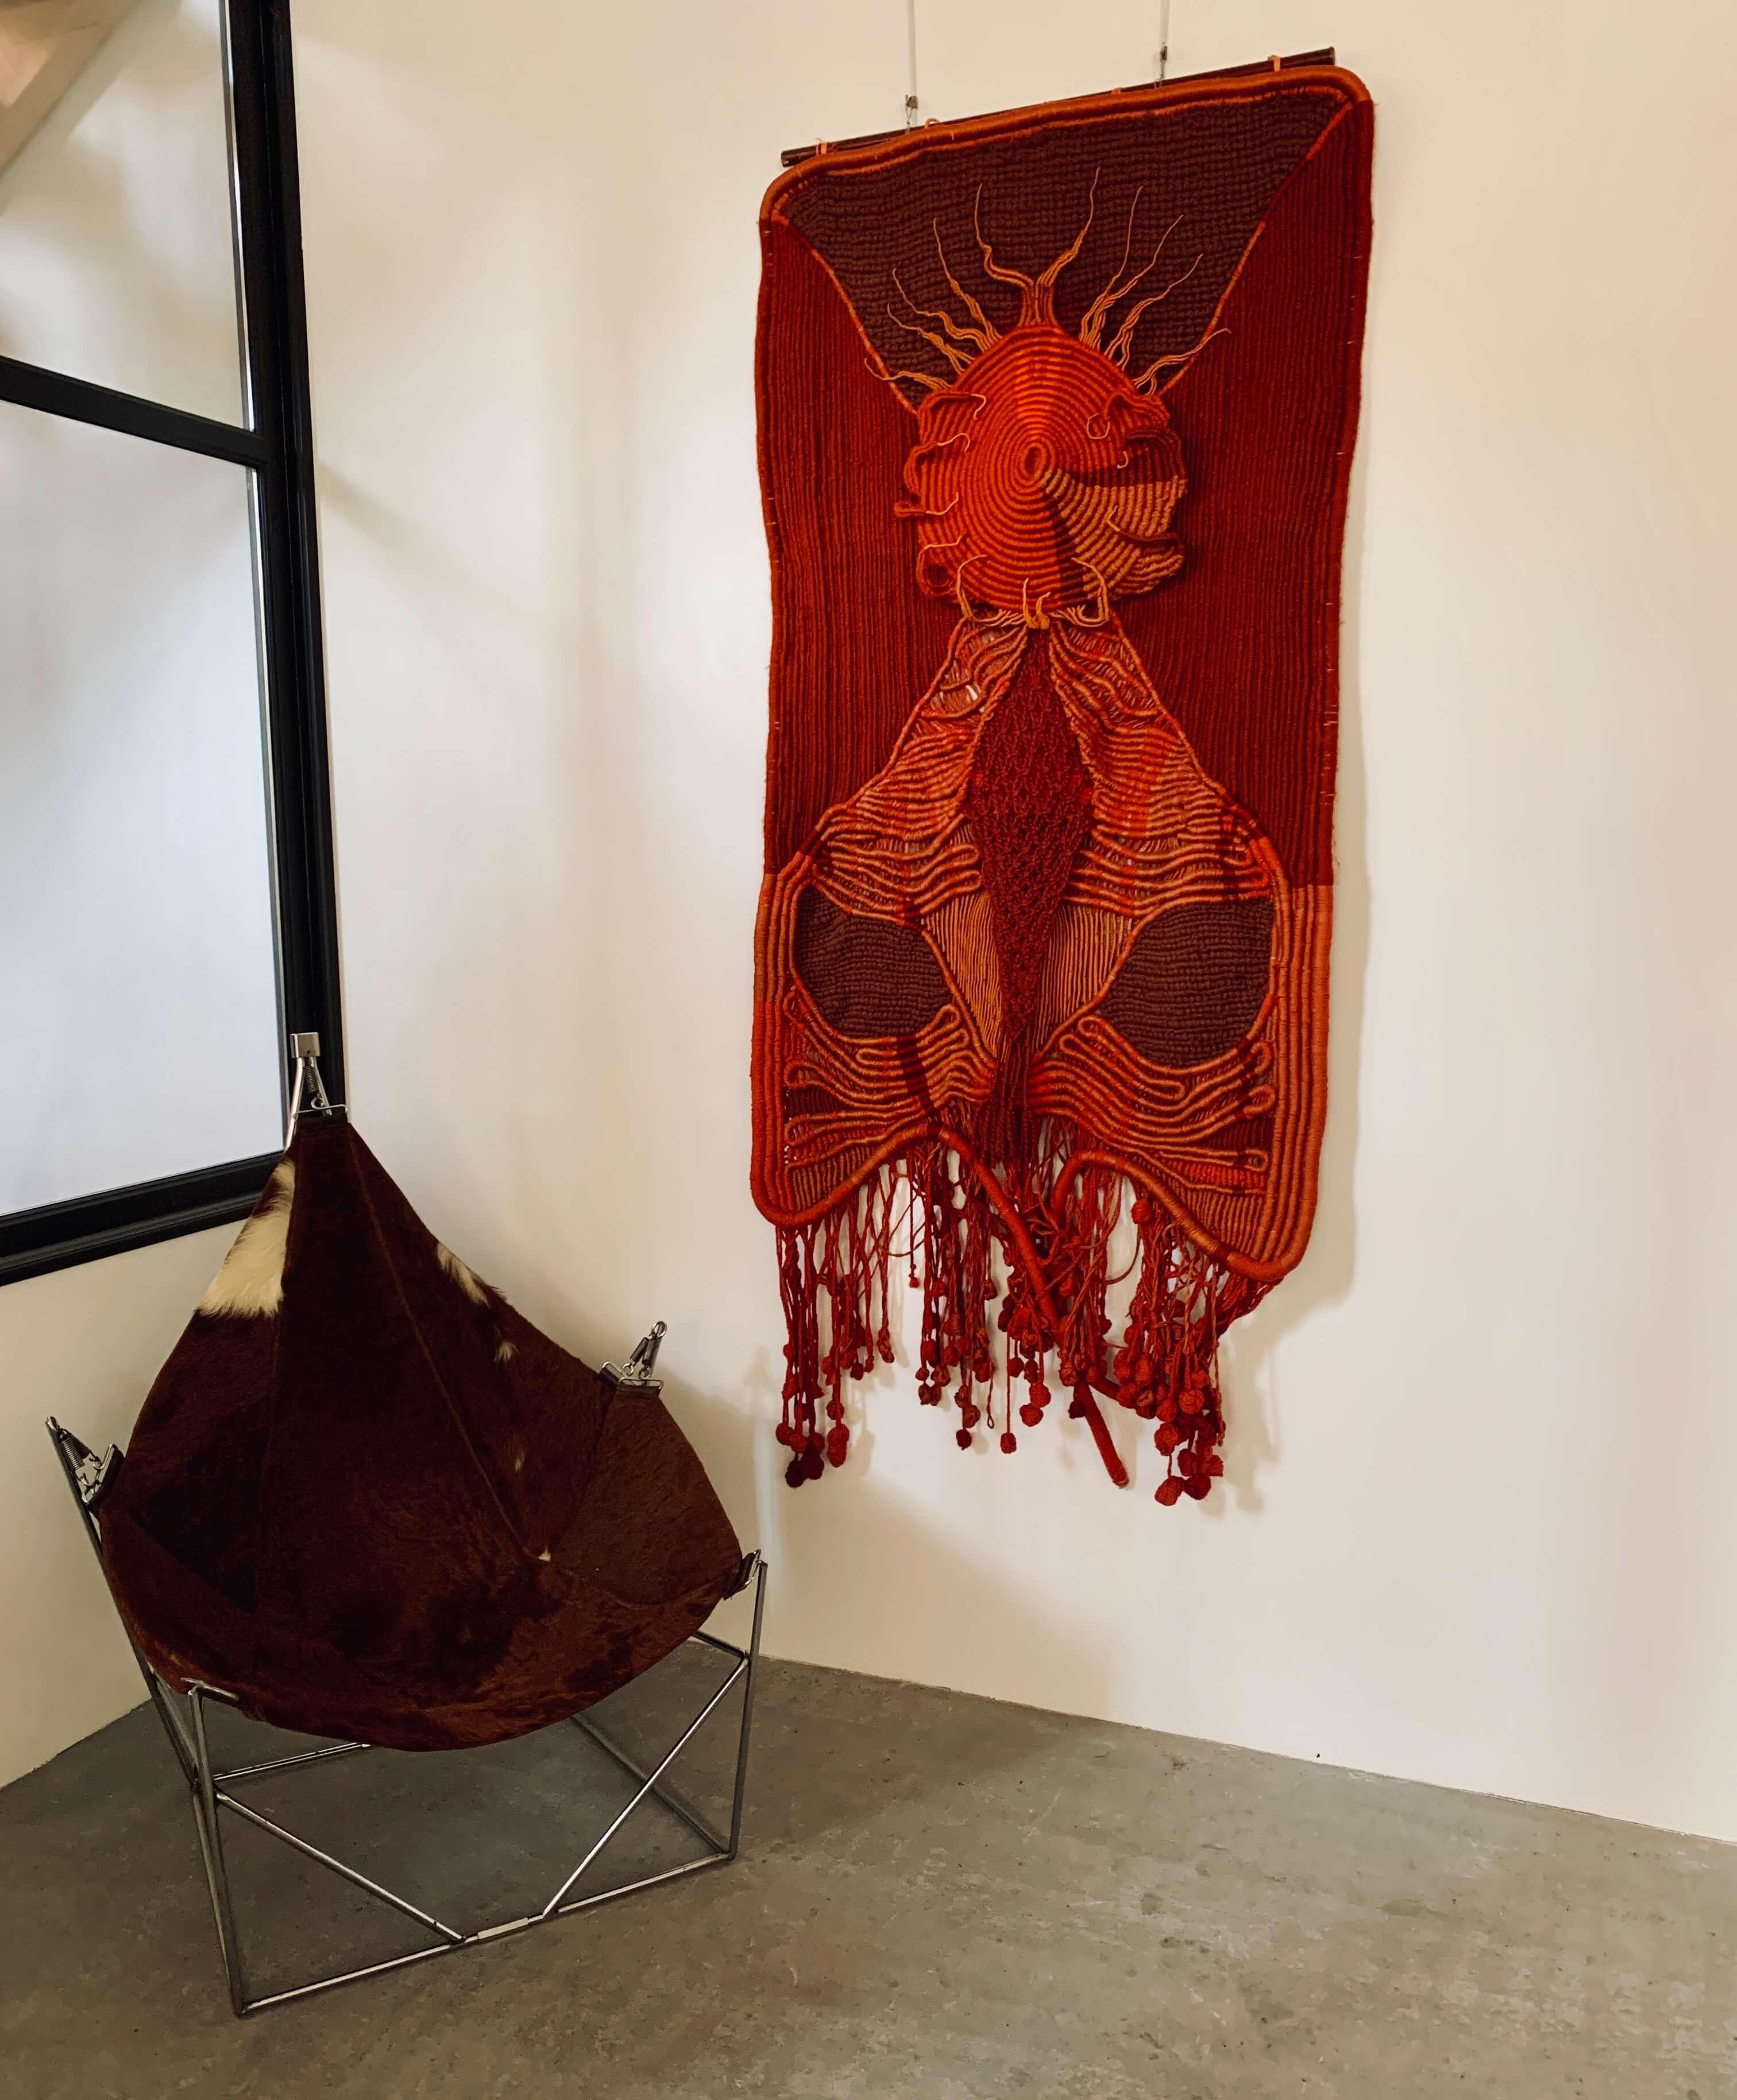 Organic sculptural tapestry by the french artist Paulette Molinier.

Profoundly original work imbued with strength and poetry.
Its technique (double weaving, twists, knots, braids, slits, etc.), however elaborate it may be, should not be seen as a